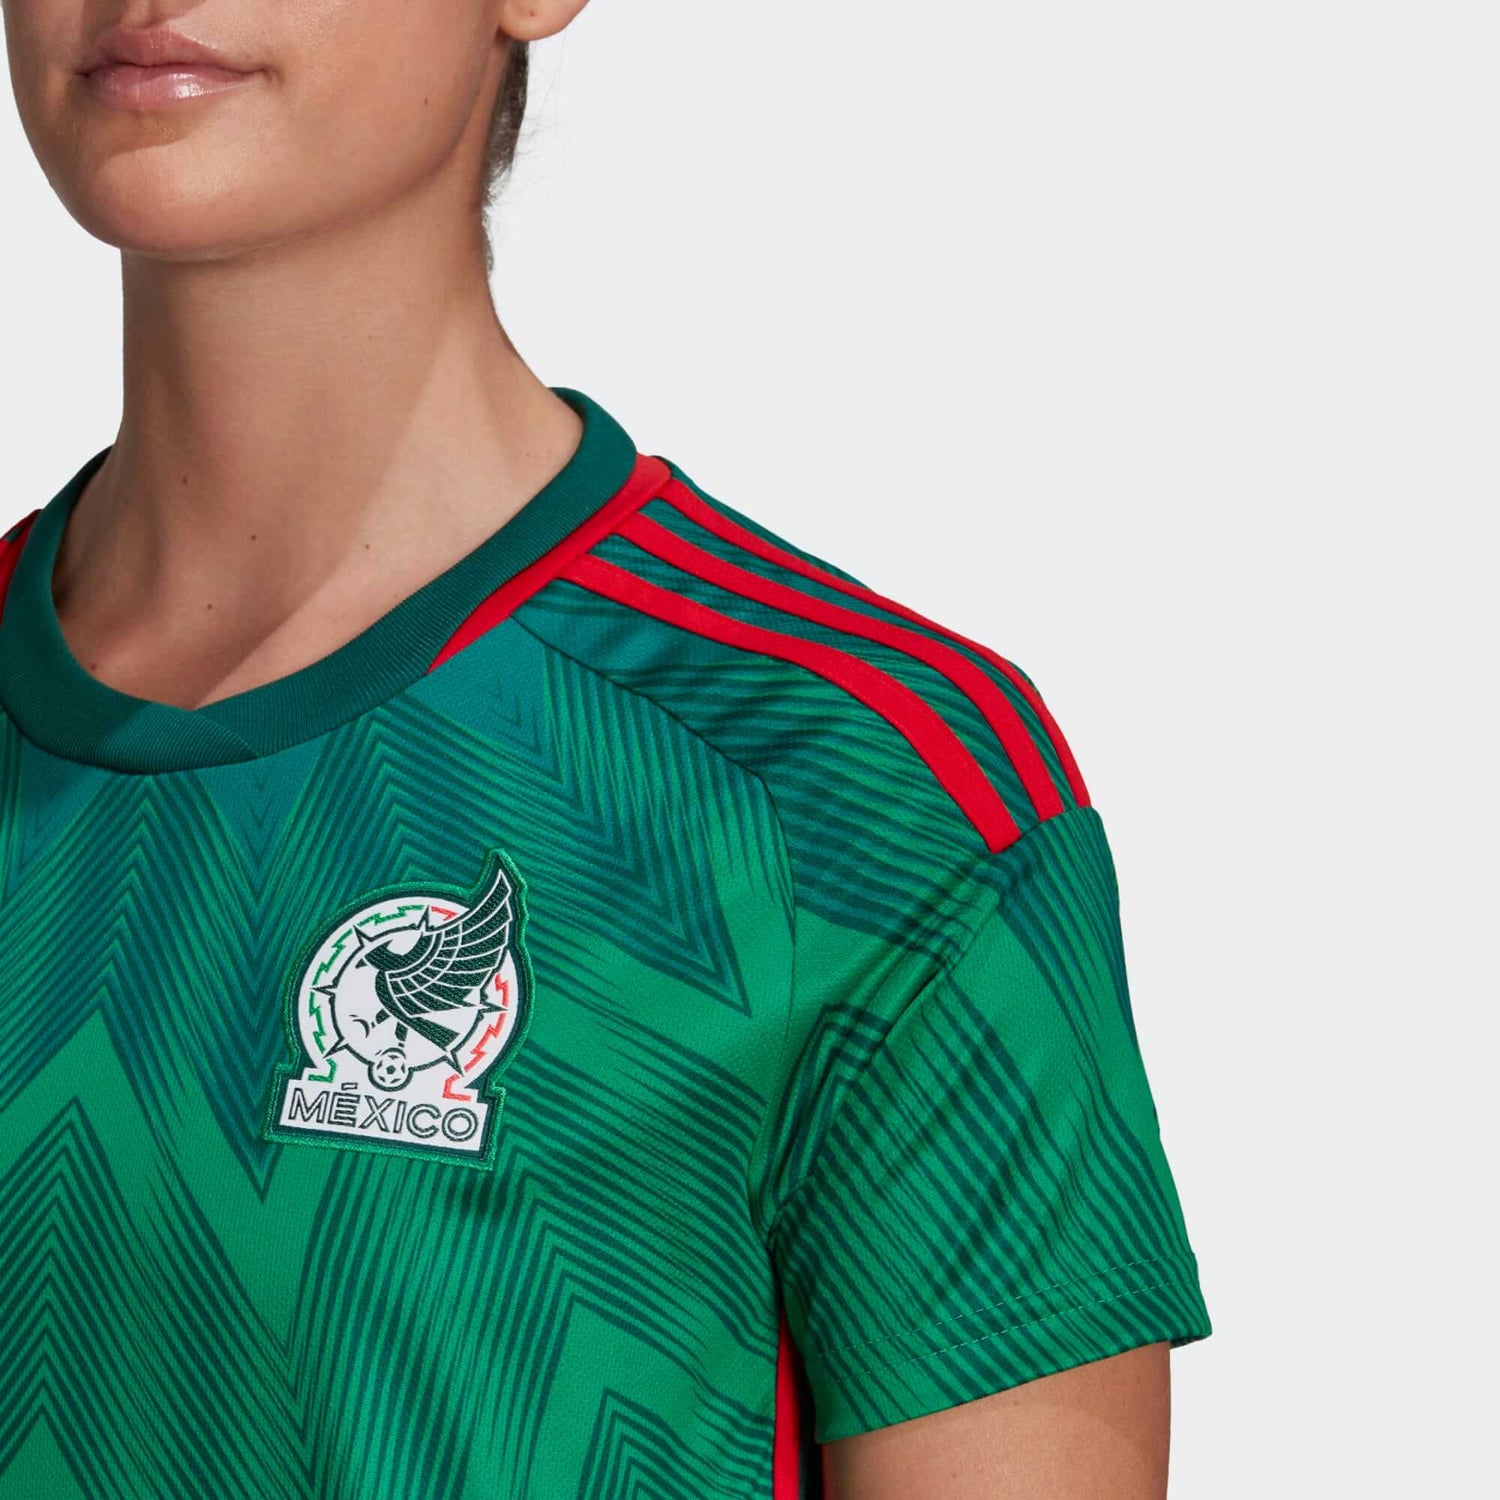 Adidas Mexico Home Jersey w/ World Cup 2022 Patches 22/23 (Vivid Green) Size M